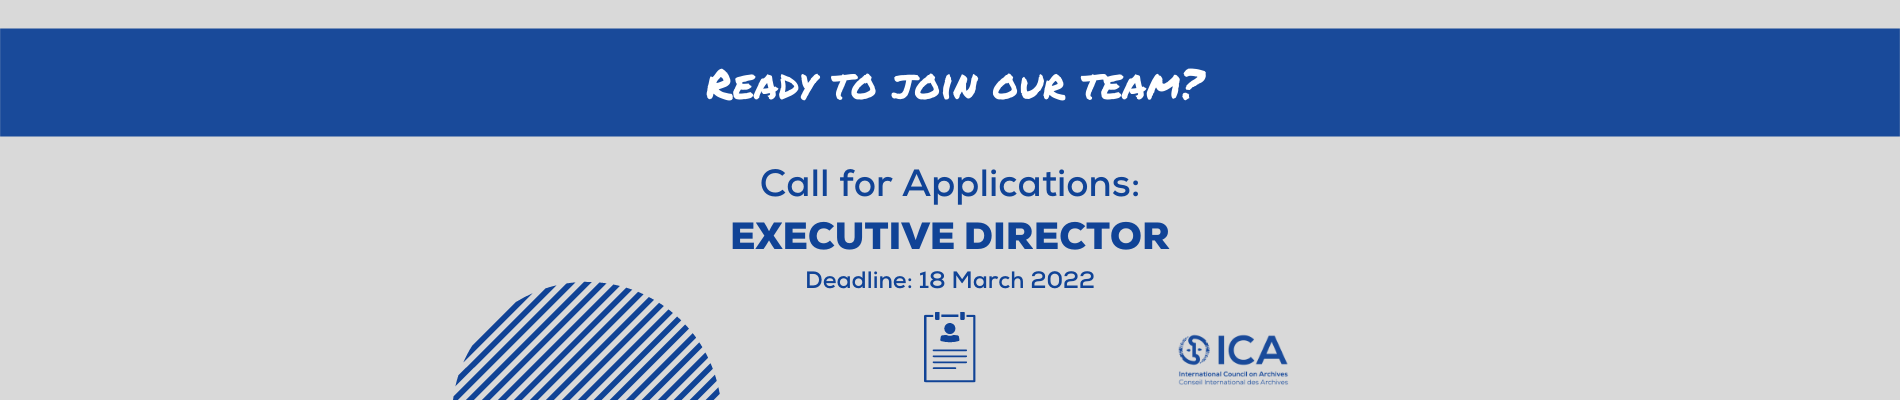 bannercall_for_applications_-_executive_director_1900_x_400_px_0